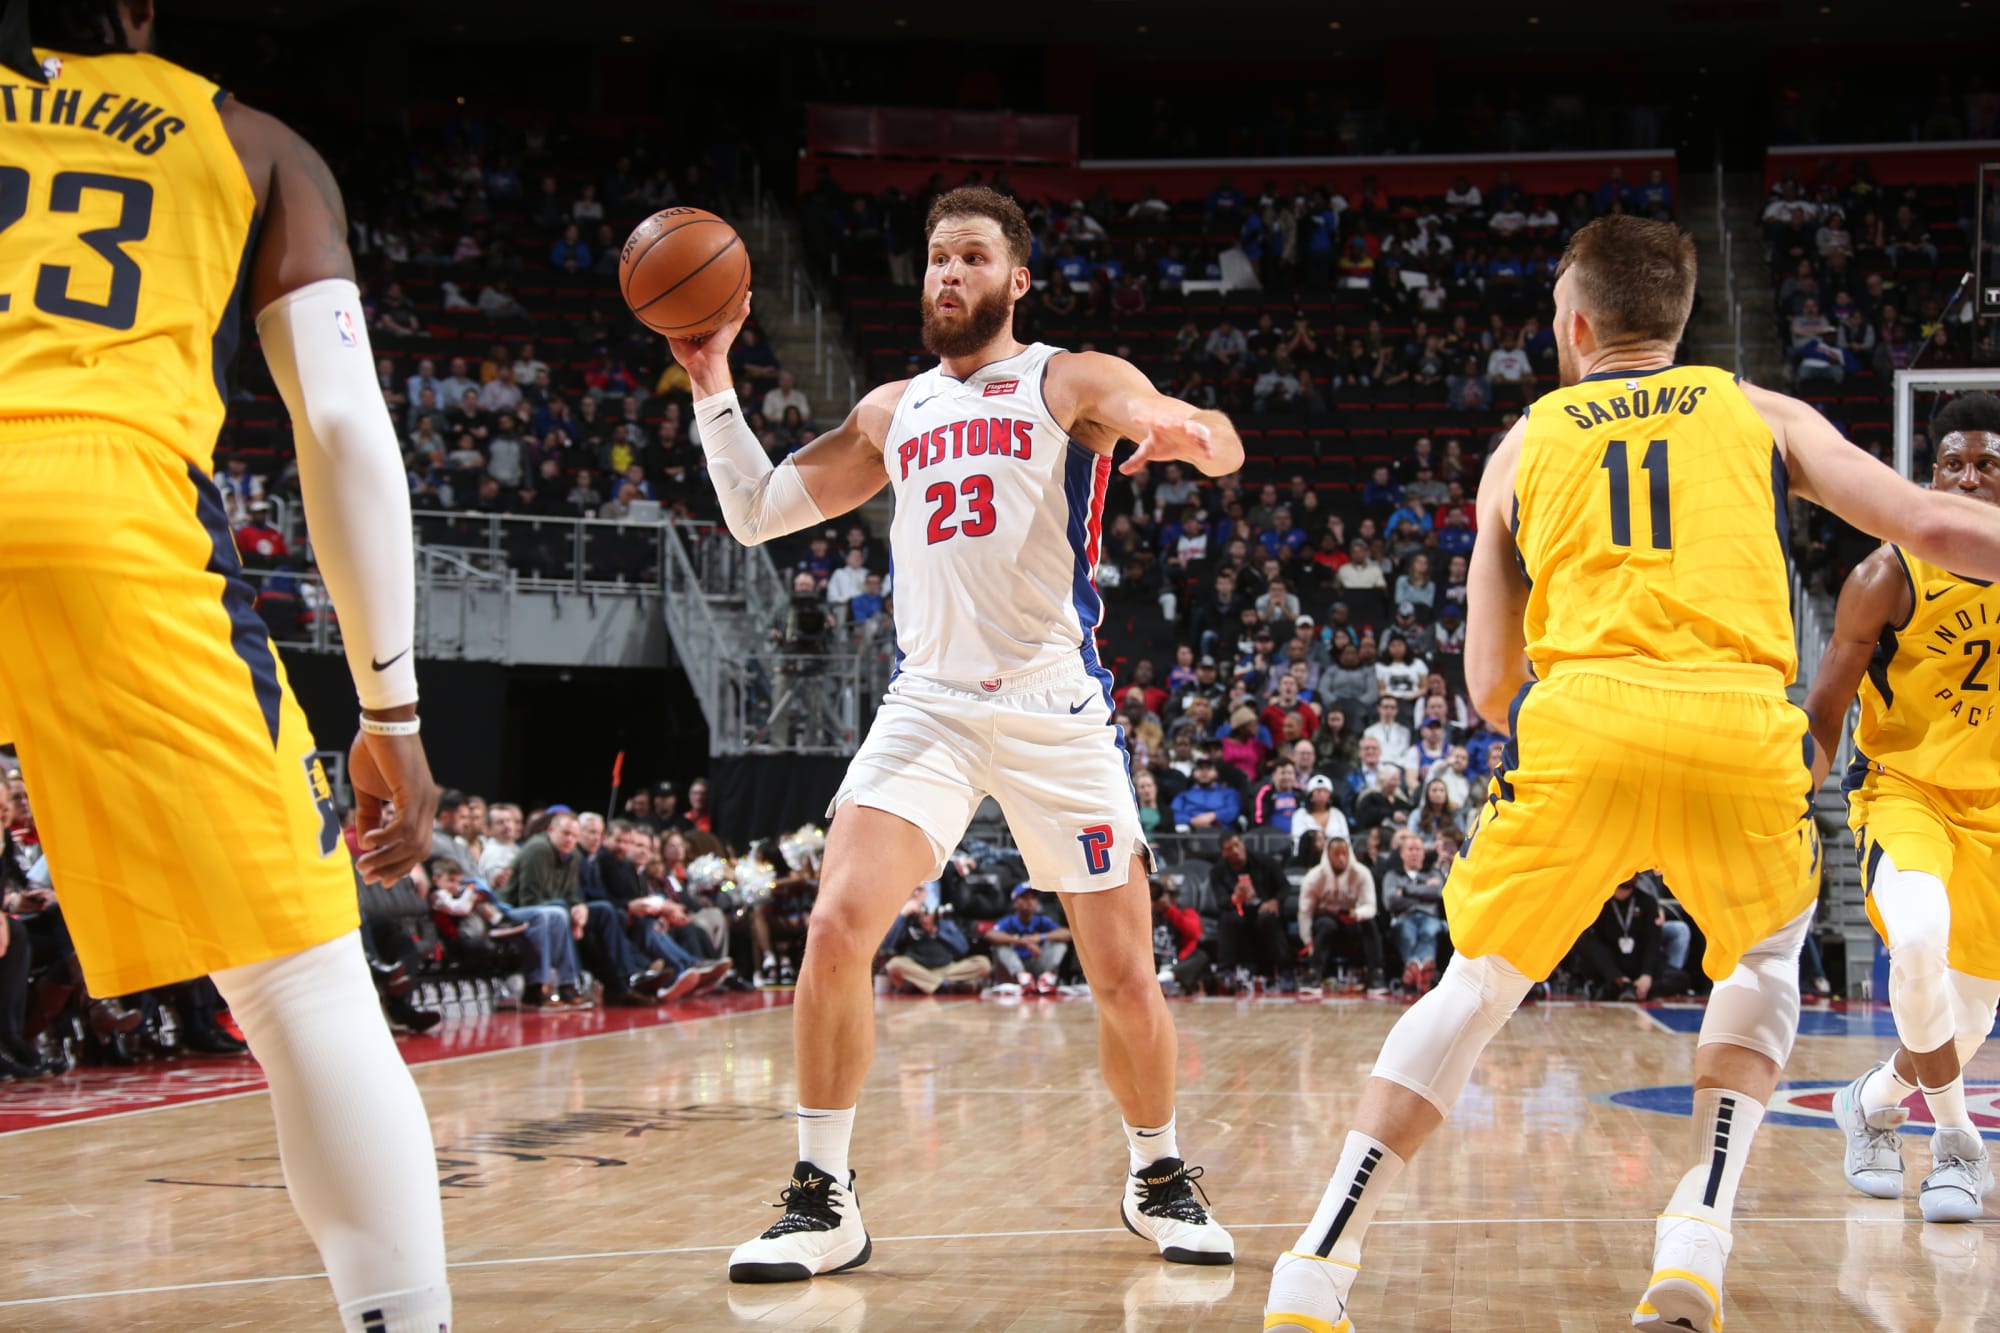 Detroit Pistons vs. Indiana Pacers game thread, preview and discussion